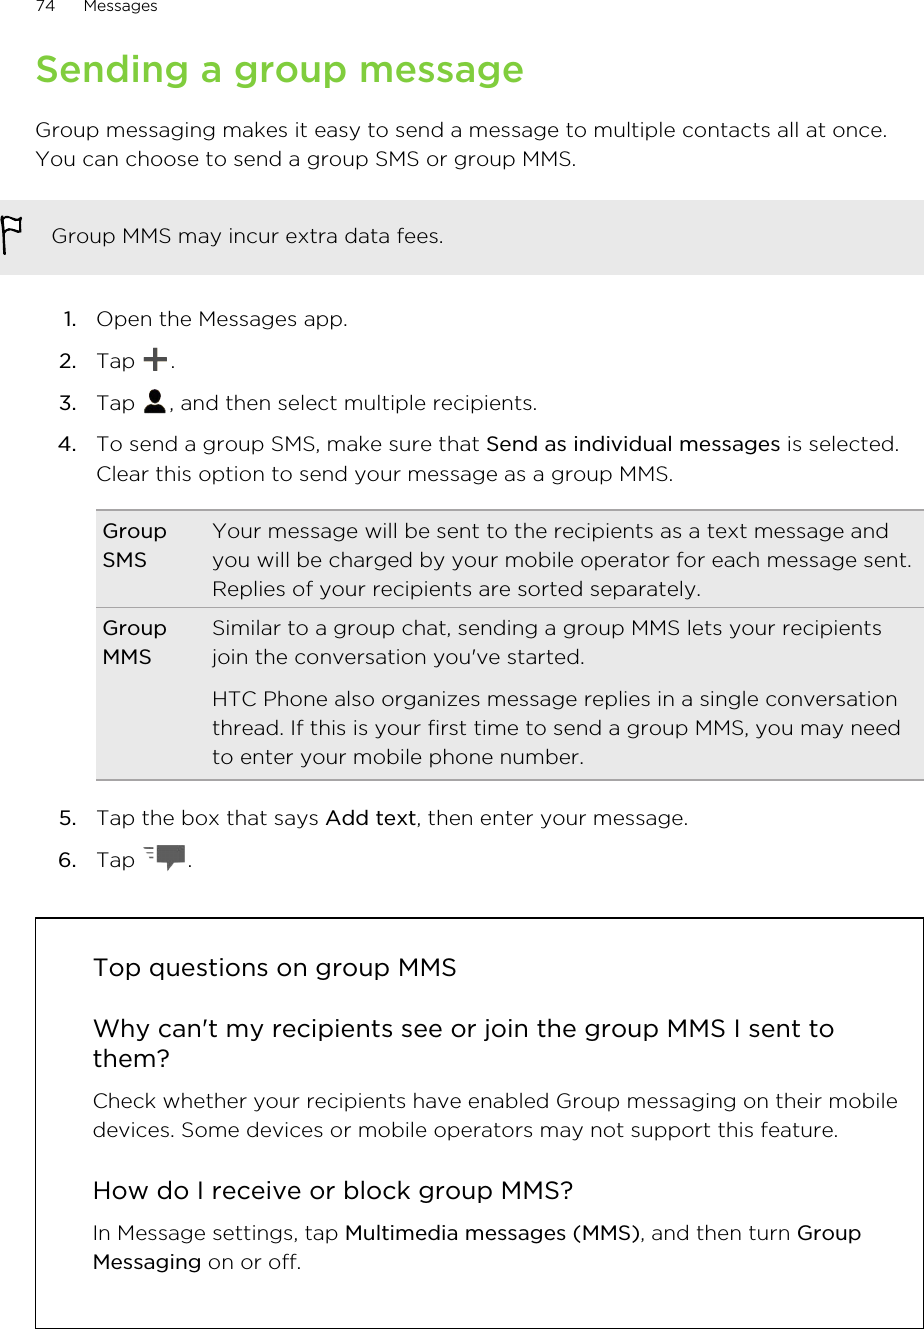 Sending a group messageGroup messaging makes it easy to send a message to multiple contacts all at once.You can choose to send a group SMS or group MMS.Group MMS may incur extra data fees.1. Open the Messages app.2. Tap  .3. Tap  , and then select multiple recipients.4. To send a group SMS, make sure that Send as individual messages is selected.Clear this option to send your message as a group MMS.GroupSMSYour message will be sent to the recipients as a text message andyou will be charged by your mobile operator for each message sent.Replies of your recipients are sorted separately.GroupMMSSimilar to a group chat, sending a group MMS lets your recipientsjoin the conversation you&apos;ve started.HTC Phone also organizes message replies in a single conversationthread. If this is your first time to send a group MMS, you may needto enter your mobile phone number.5. Tap the box that says Add text, then enter your message.6. Tap  .Top questions on group MMSWhy can&apos;t my recipients see or join the group MMS I sent tothem?Check whether your recipients have enabled Group messaging on their mobiledevices. Some devices or mobile operators may not support this feature.How do I receive or block group MMS?In Message settings, tap Multimedia messages (MMS), and then turn GroupMessaging on or off.74 MessagesHTC Confidential for Certification HTC Confidential for Certification